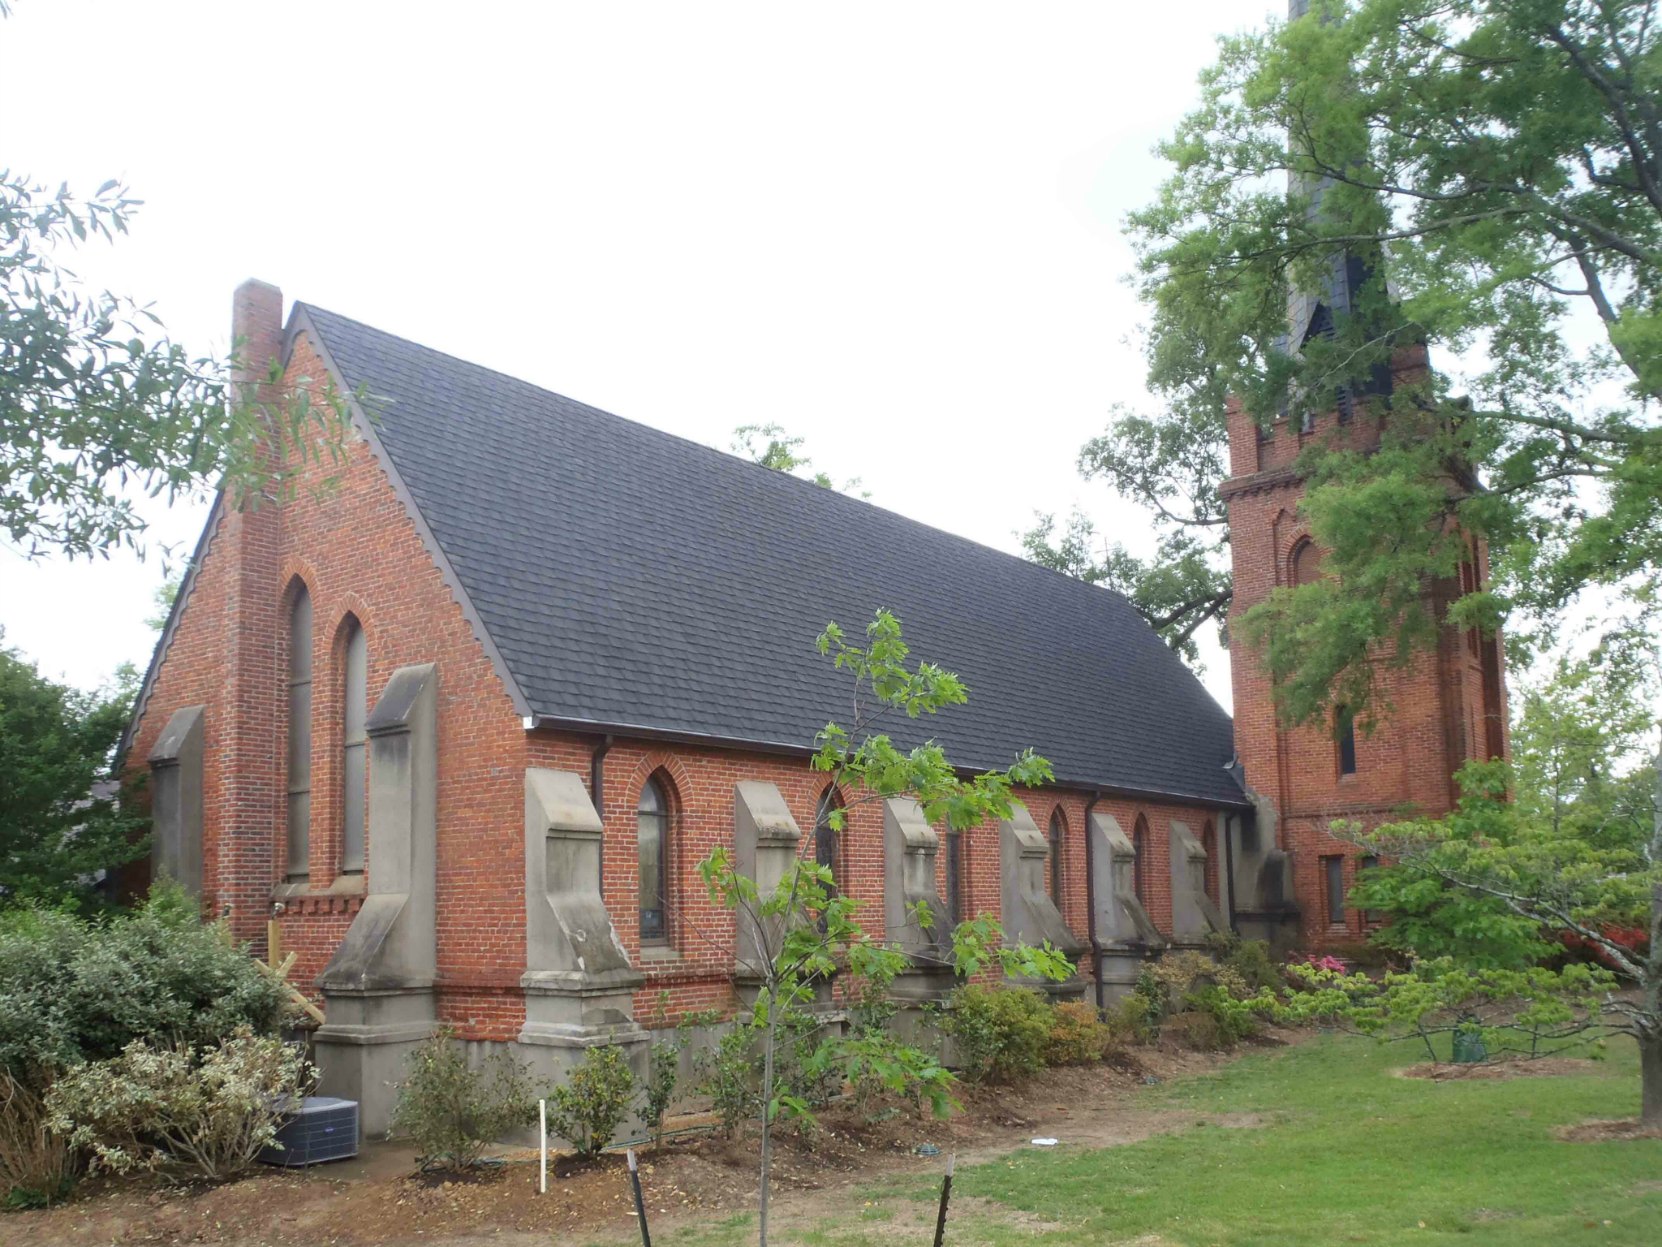 St. Peter's Episcopal Church, Oxford, Mississippi. William Faulkner was a parishioner of this church.